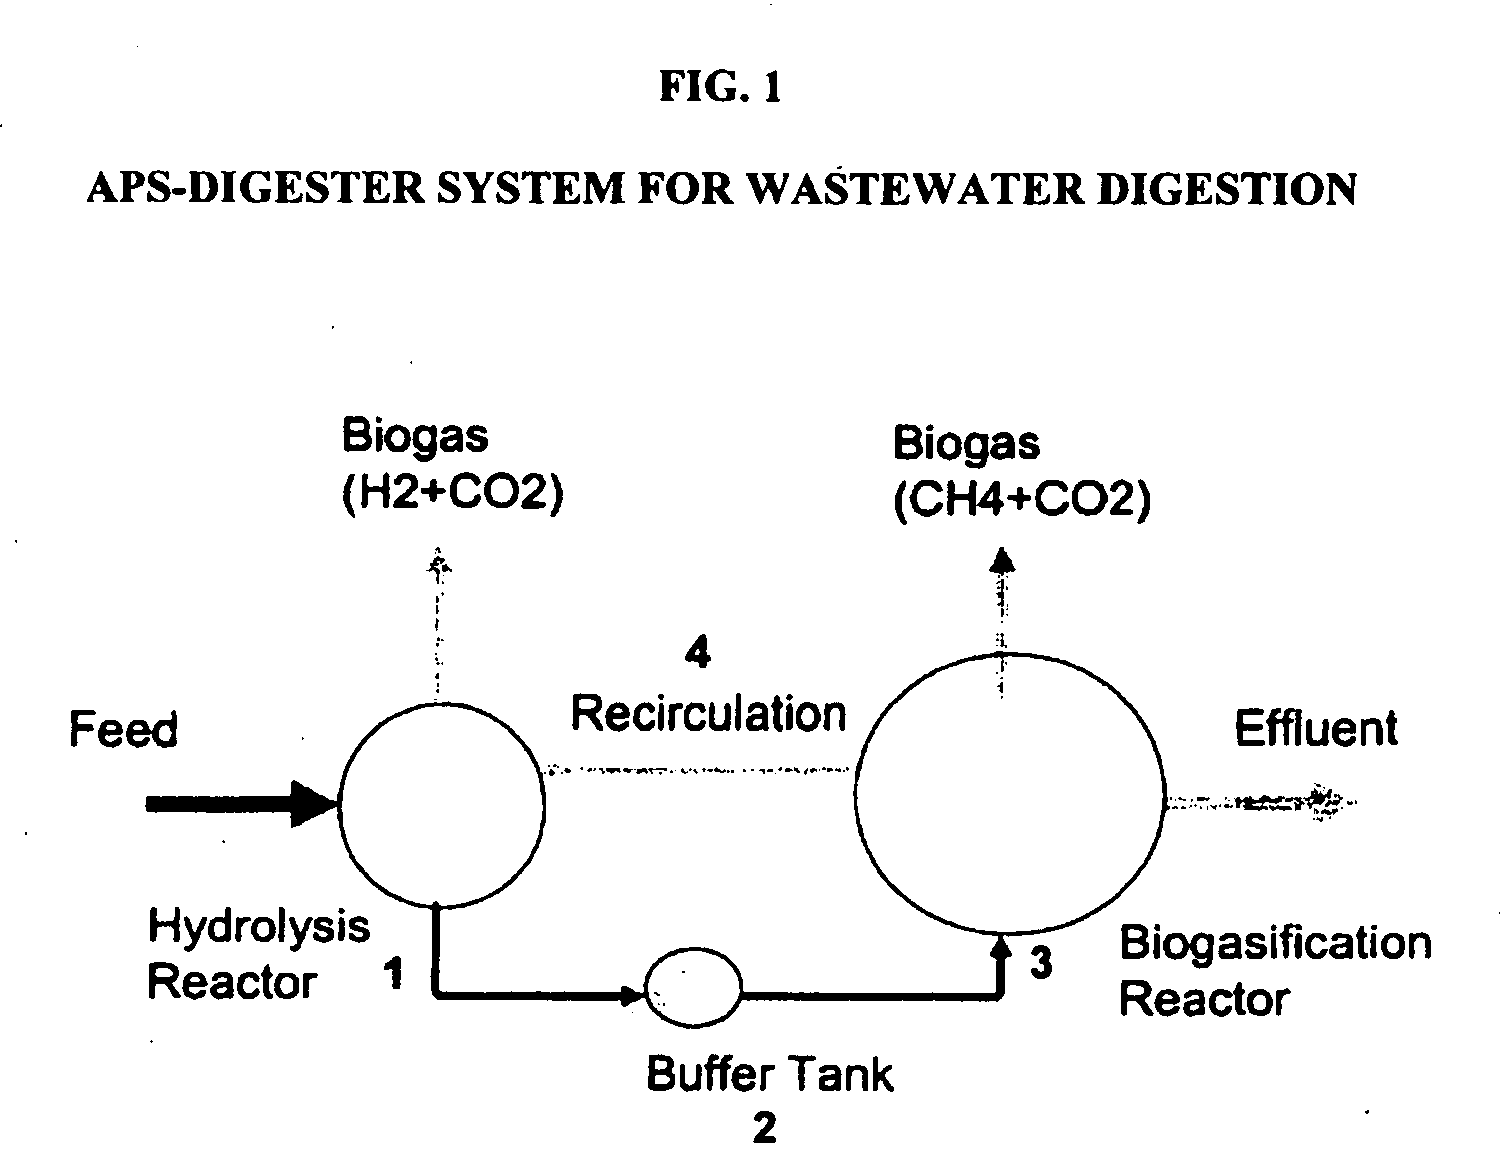 Anaerobic phased solids digester for biogas production from organic solid wastes